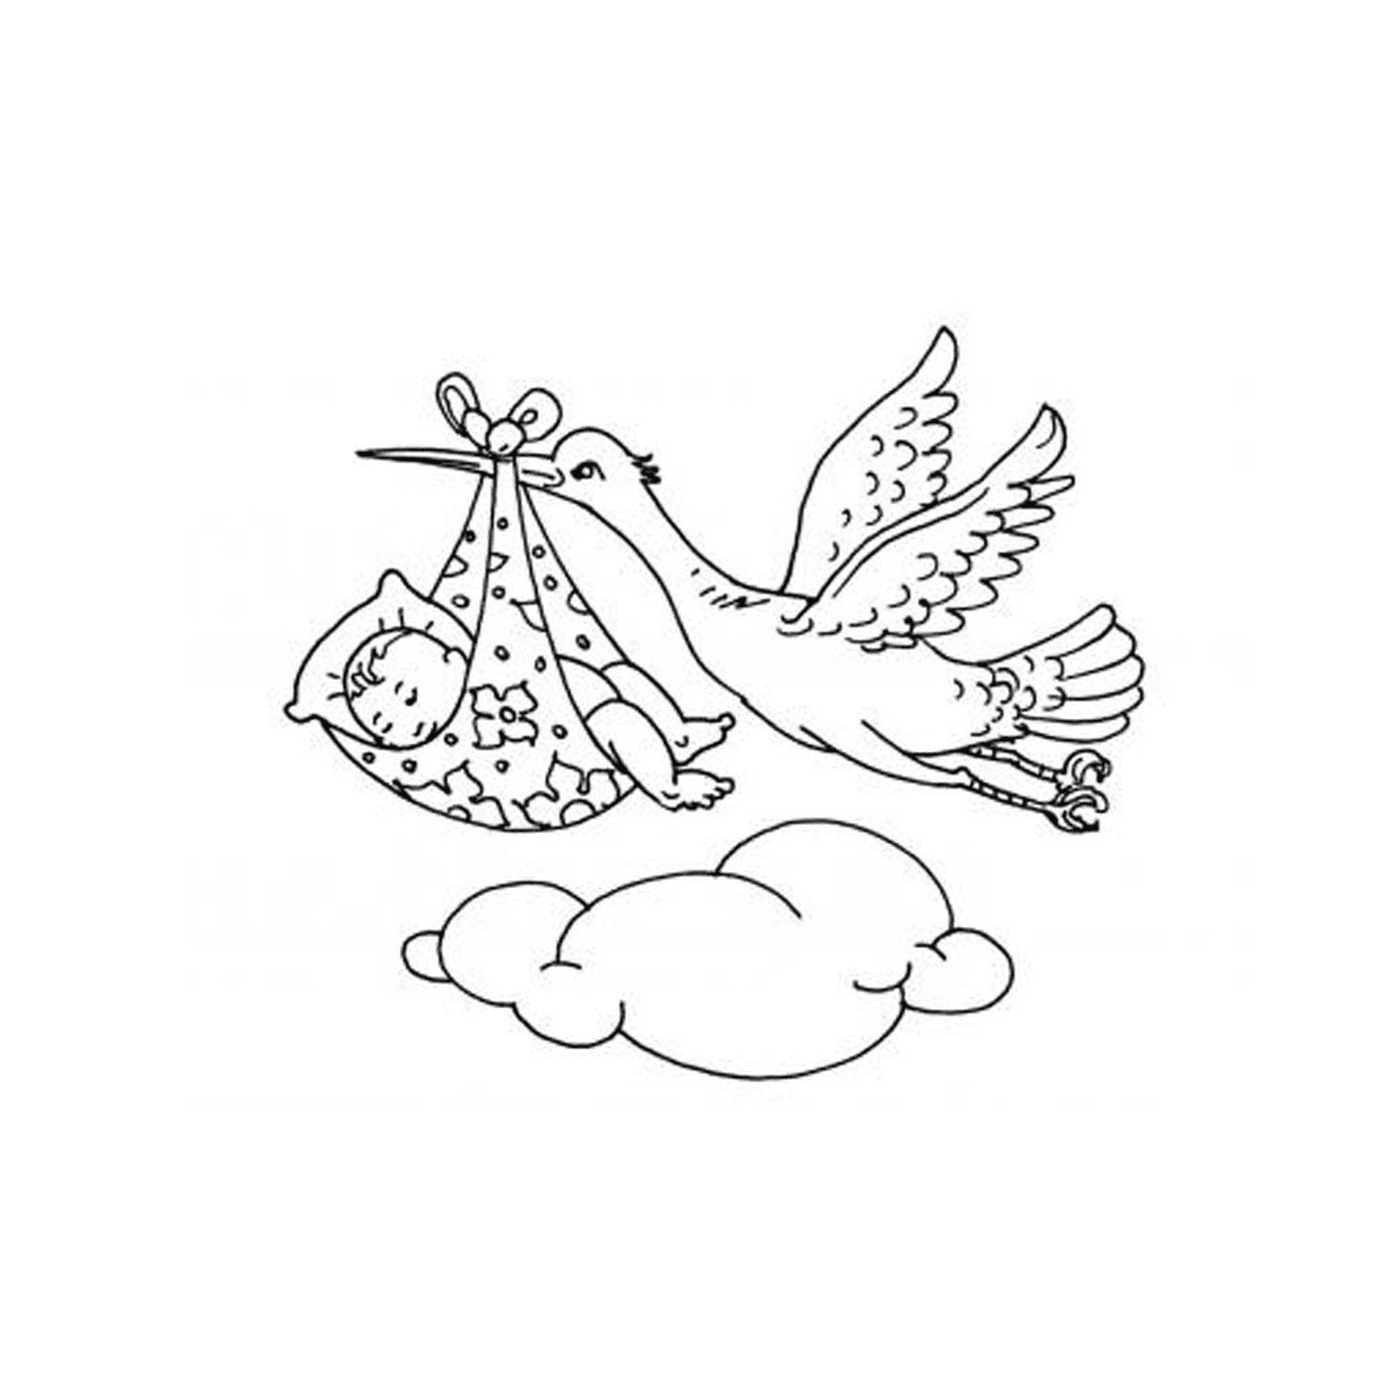  A bird flying over a baby in a cradle 